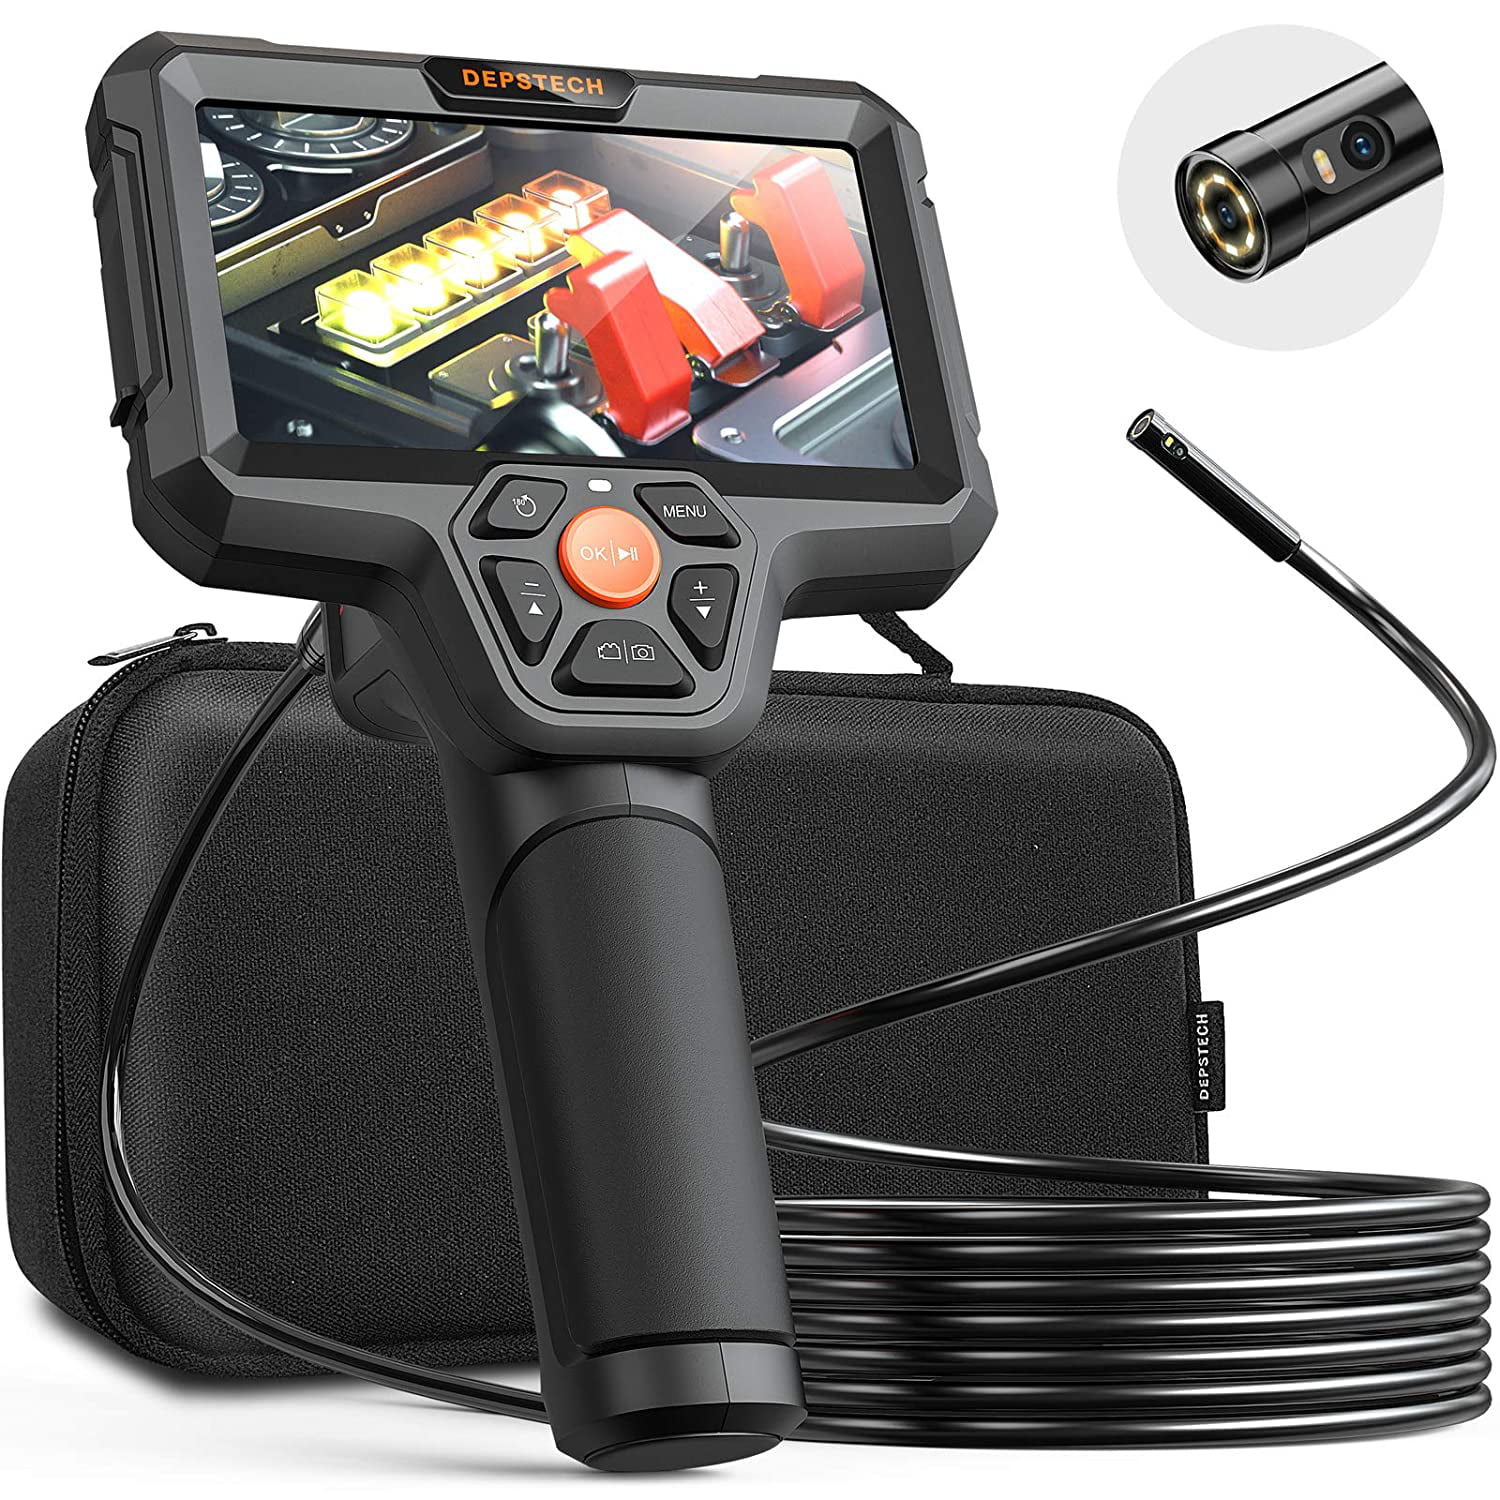 DEPSTECH Dual Lens Inspection Camera 5000 mAh Battery Carrying Case Sewer Camera with LED Flashlight 7.9 mm HD Borescope Endoscope with 5 IPS LCD Screen 32 GB Detachable Snake Camera-16.5ft 